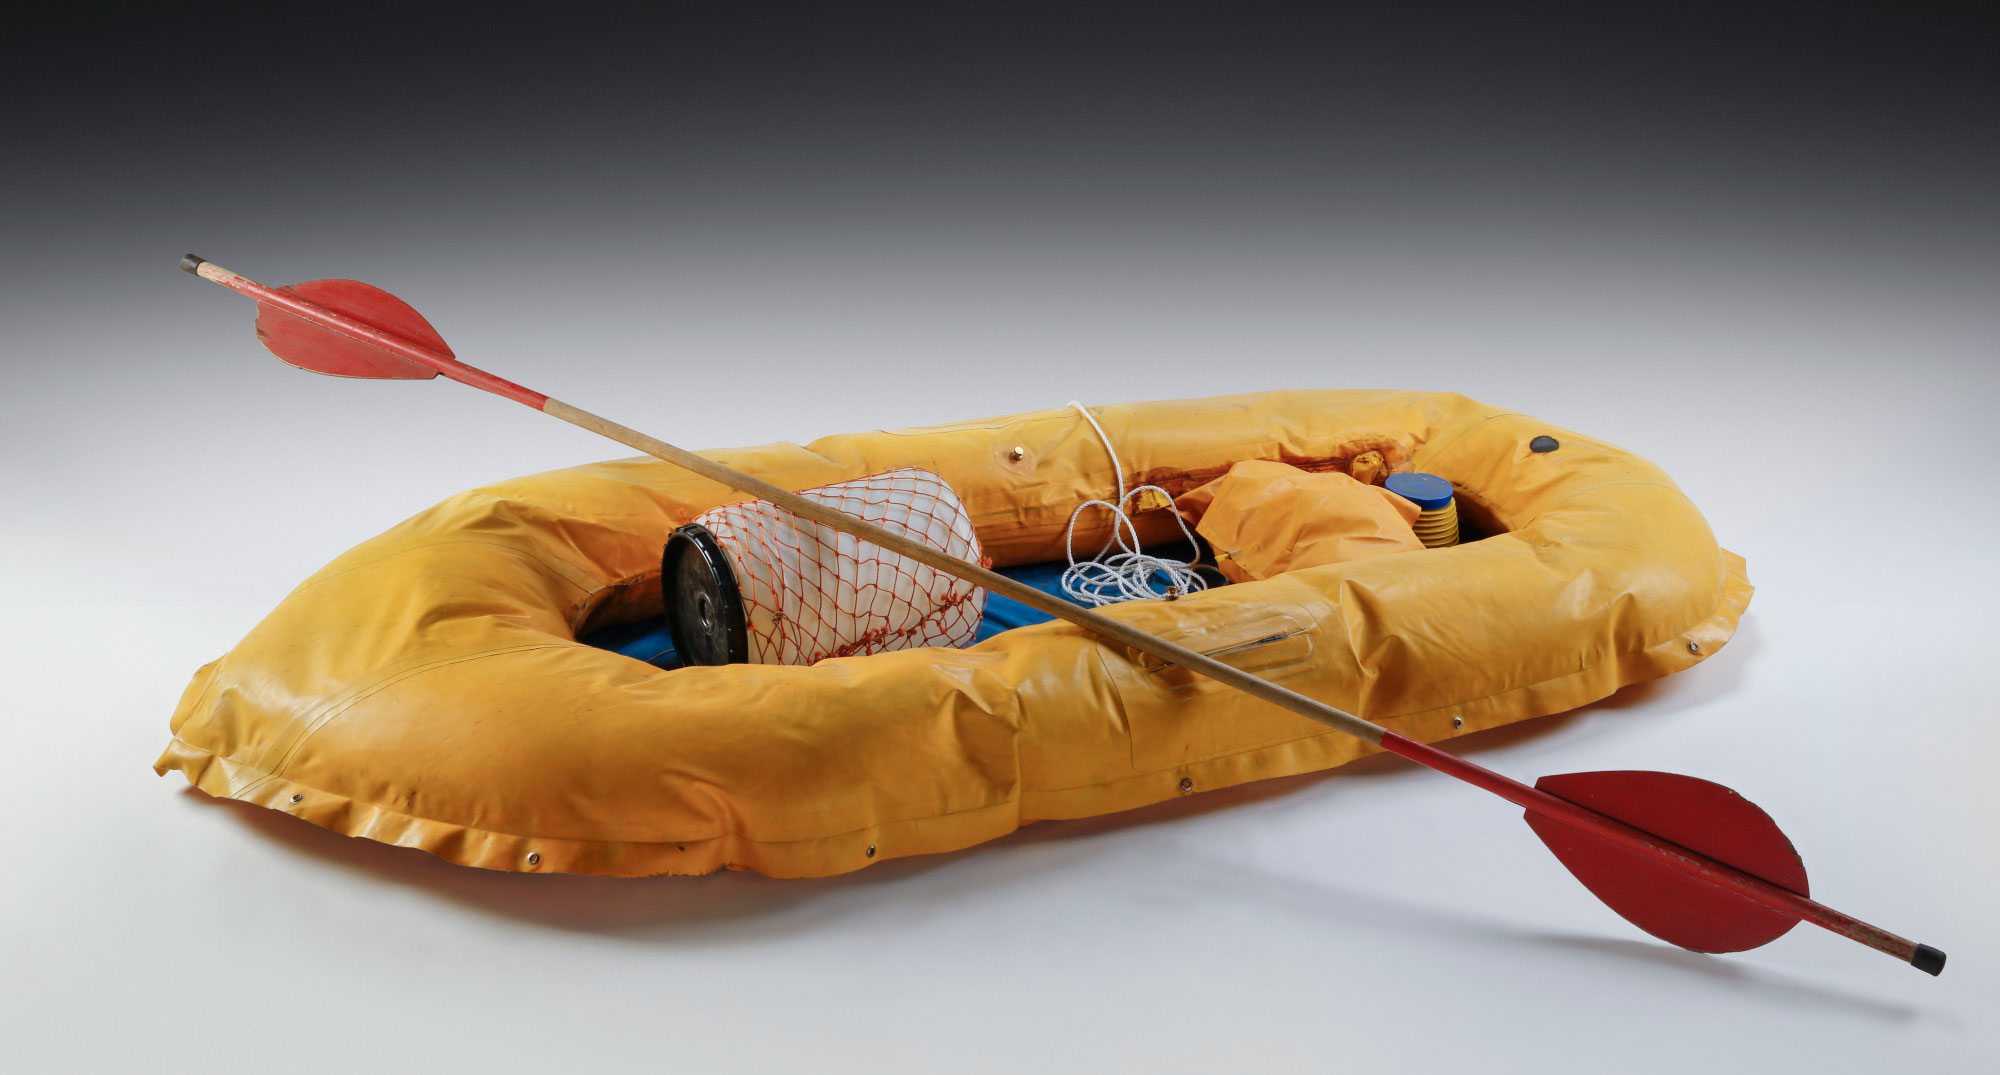 Raft used by Paul Smith and Bob Brown on the Franklin River in 1976.